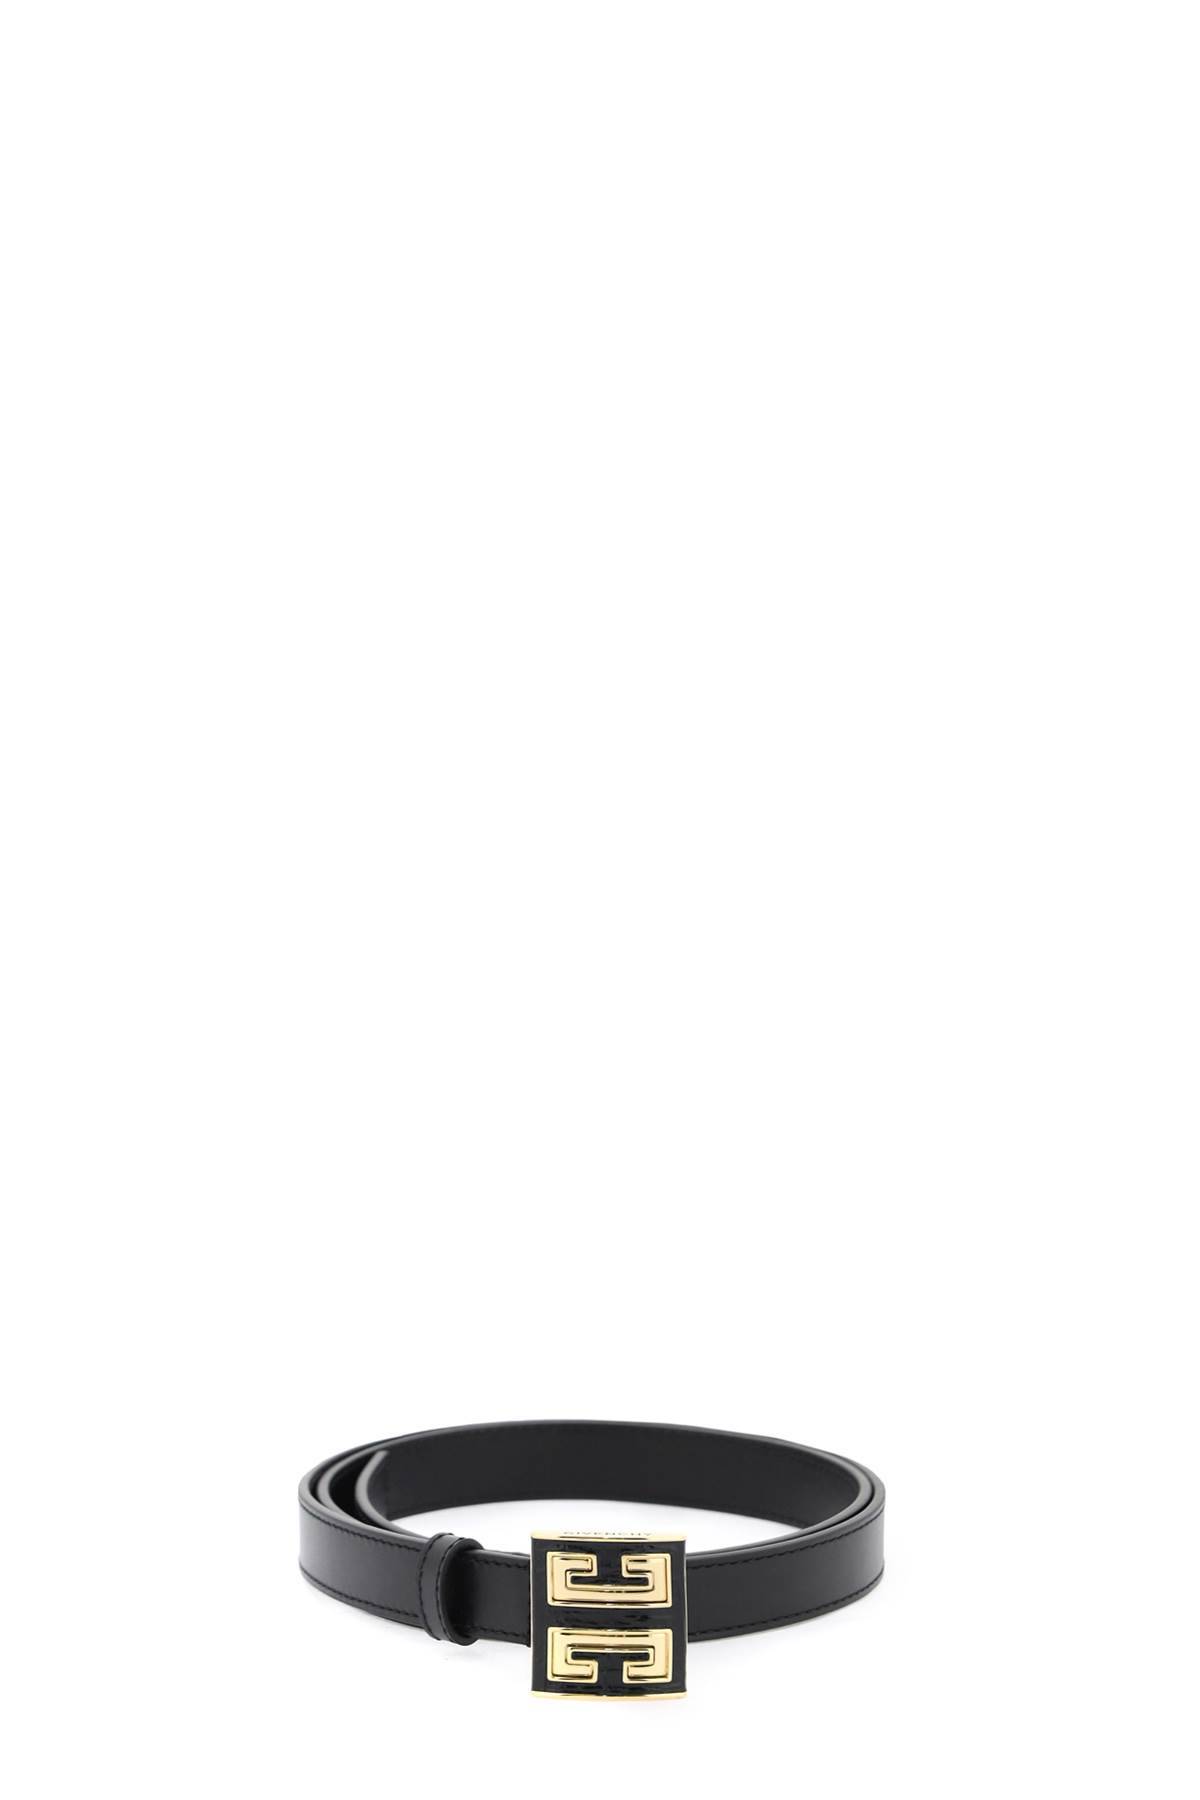 Givenchy Leather 4g Belt In Black